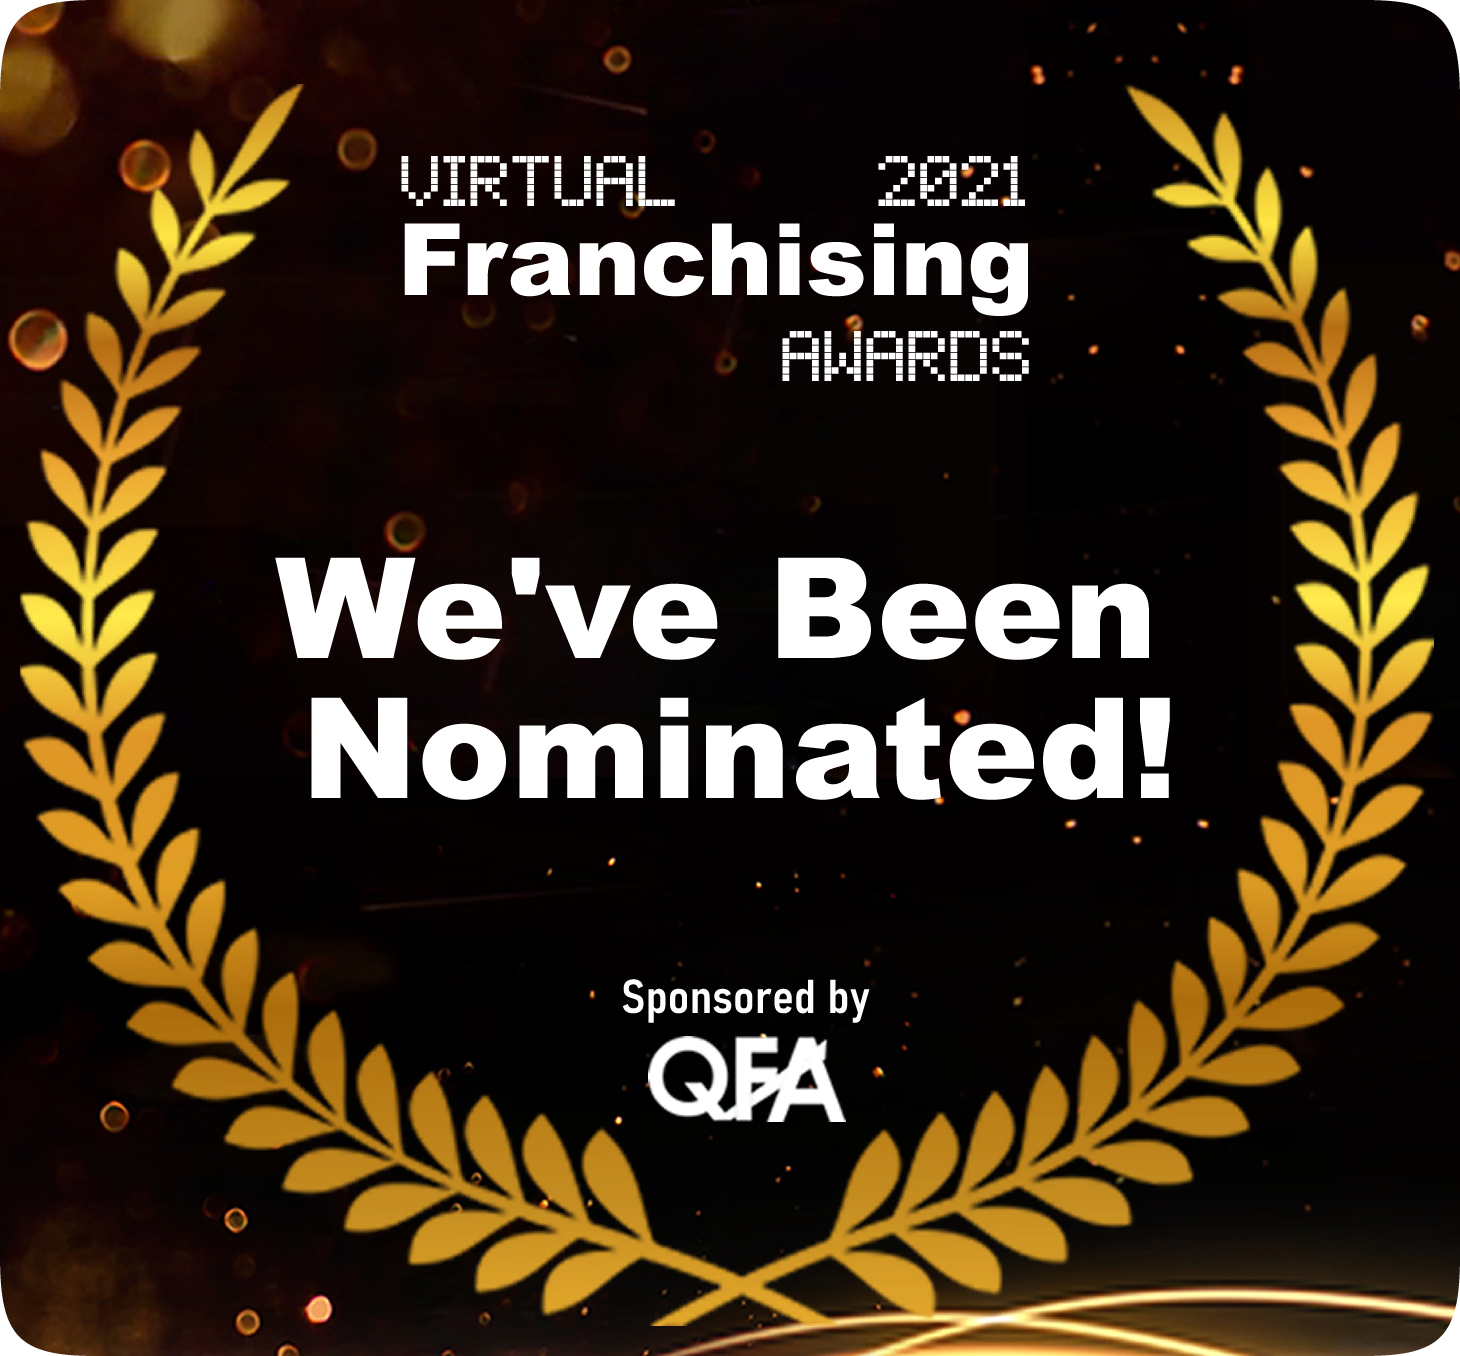 Total Guide to Get Nominated for an Award at the Virtual Franchising Awards 2021